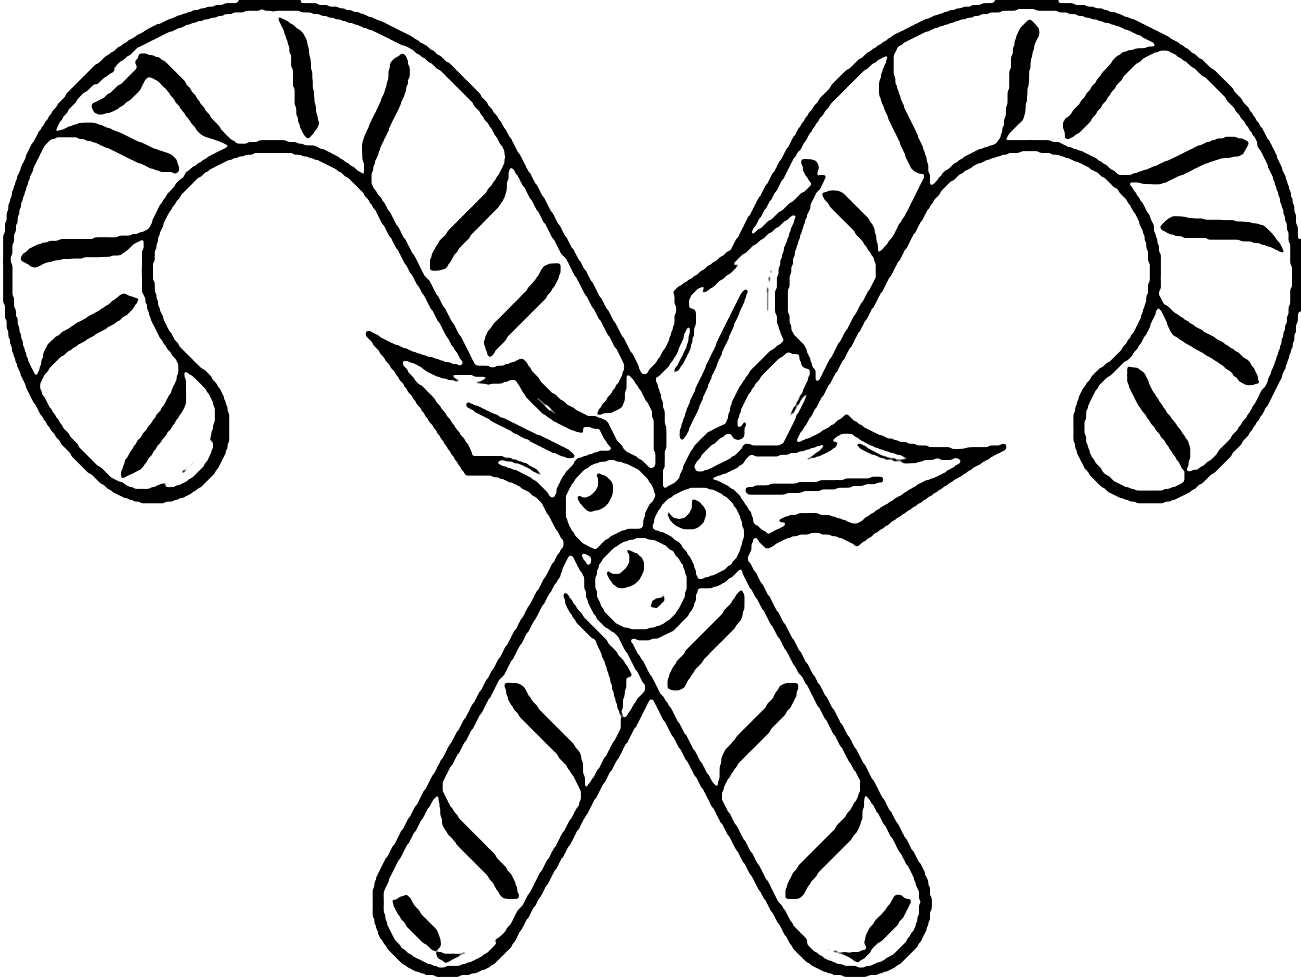 Candy Canes For Christmas Coloring Pages